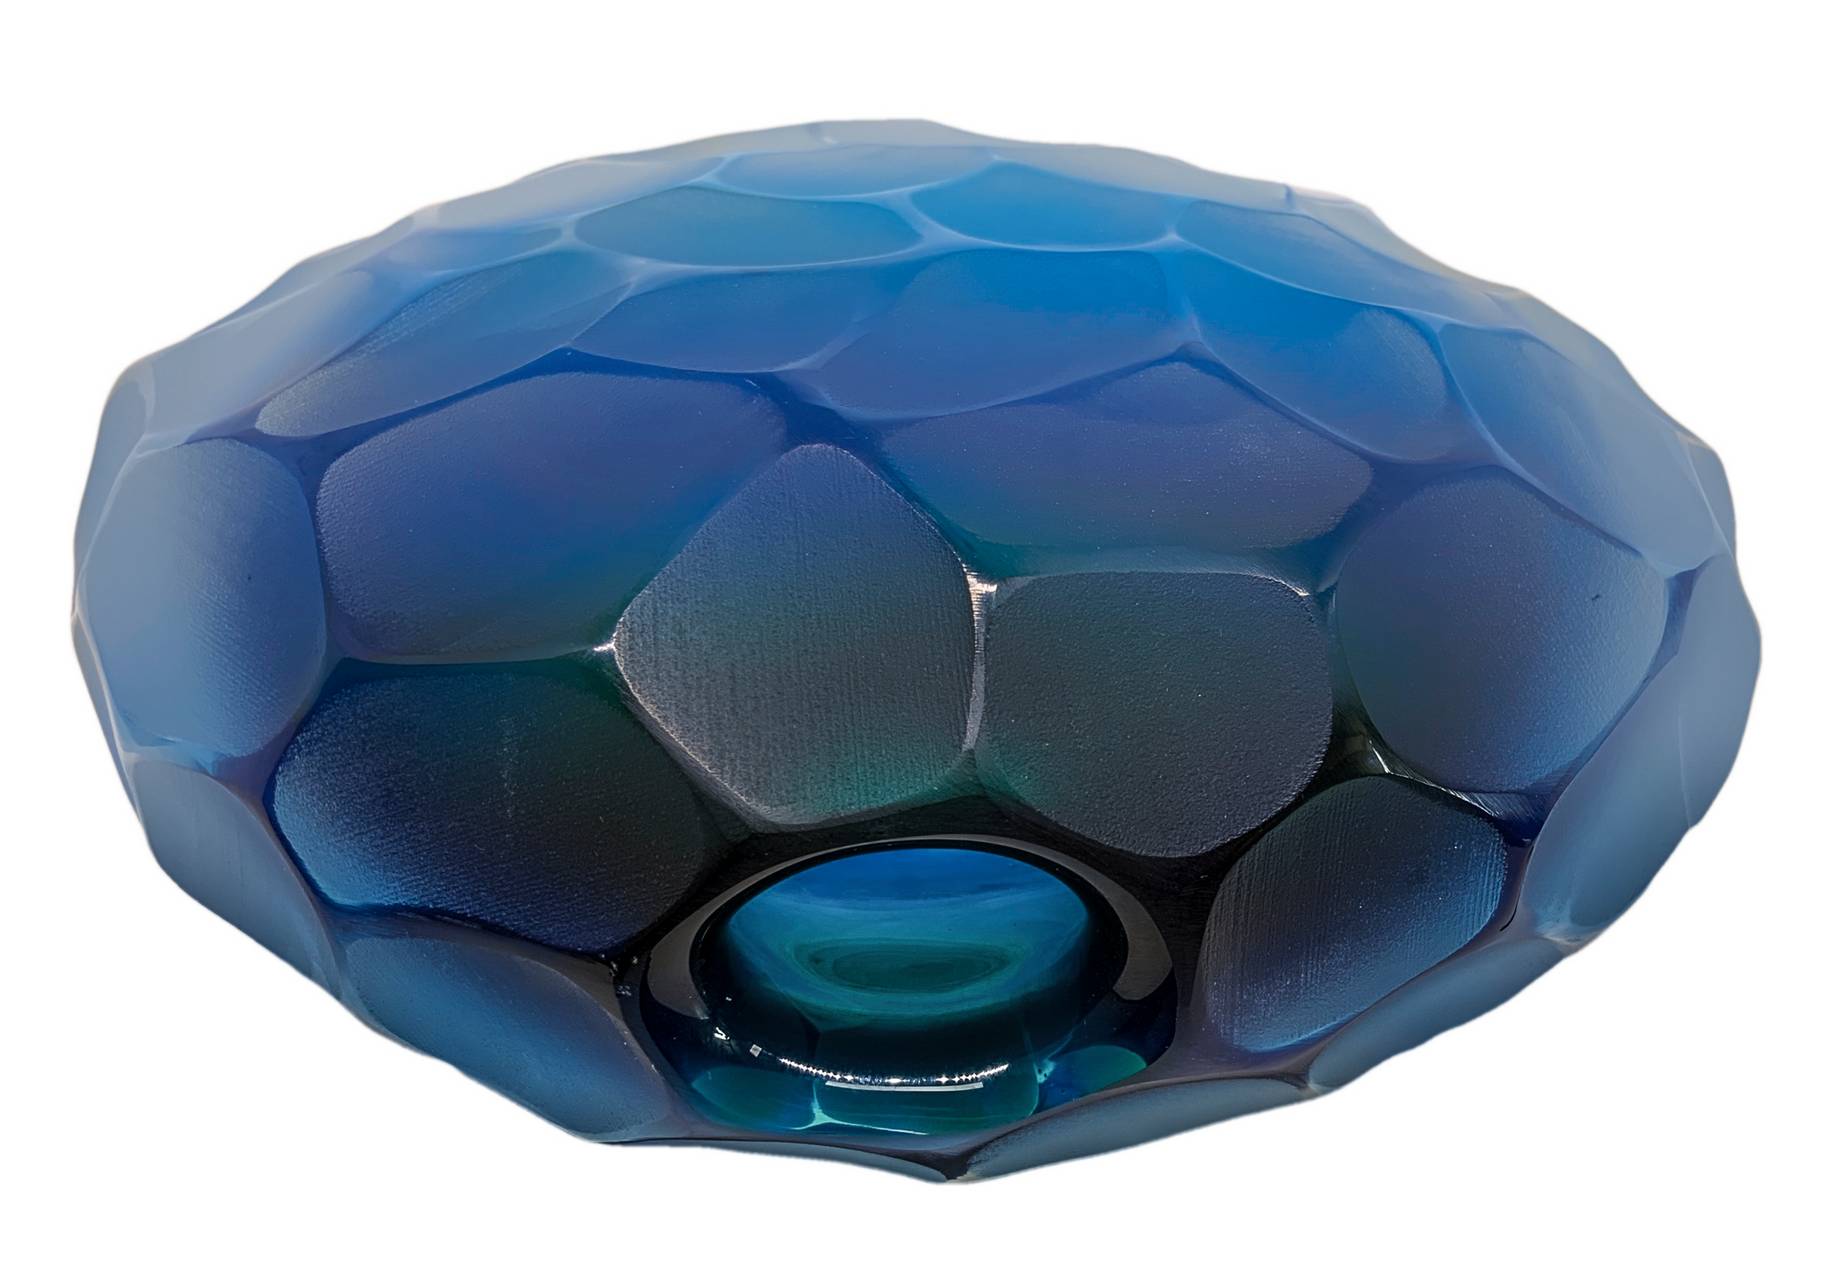 Glass jar submerged globular form in the blue and blue tones, grinded surface and veiled. Murano Gla - Image 5 of 7